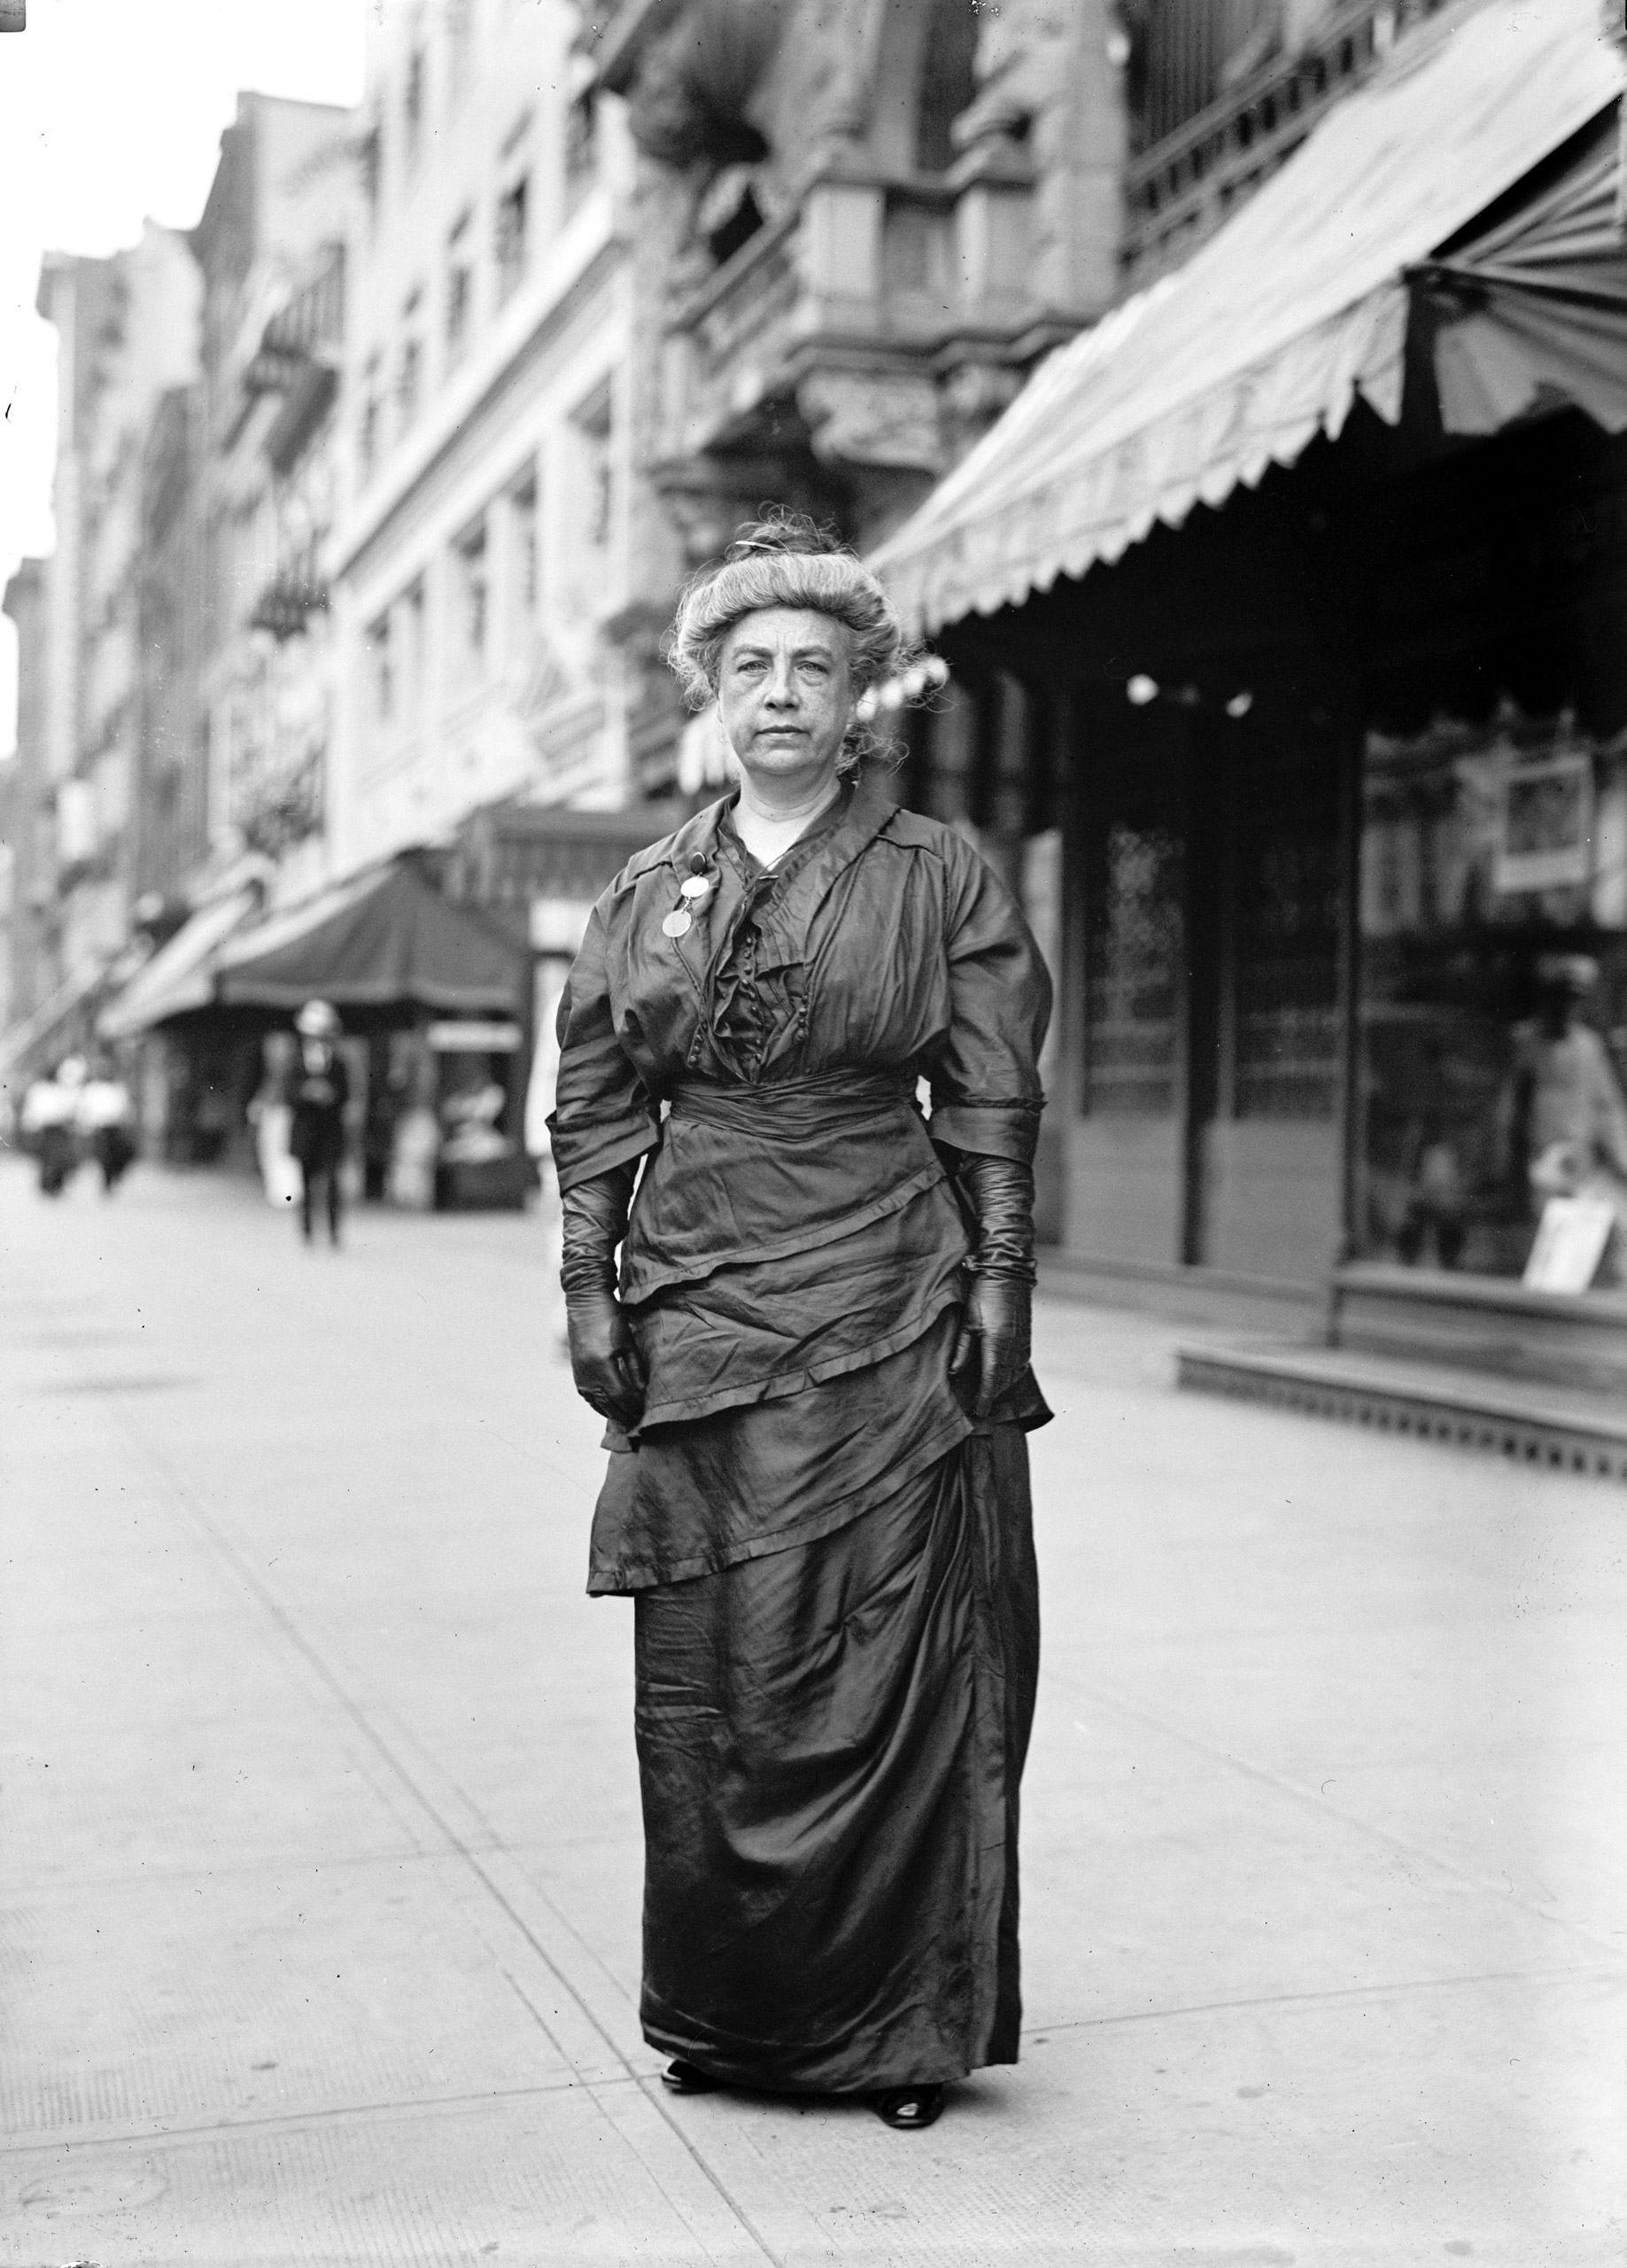 Suffragette Kate M. Gordon of Tennessee, 1914.